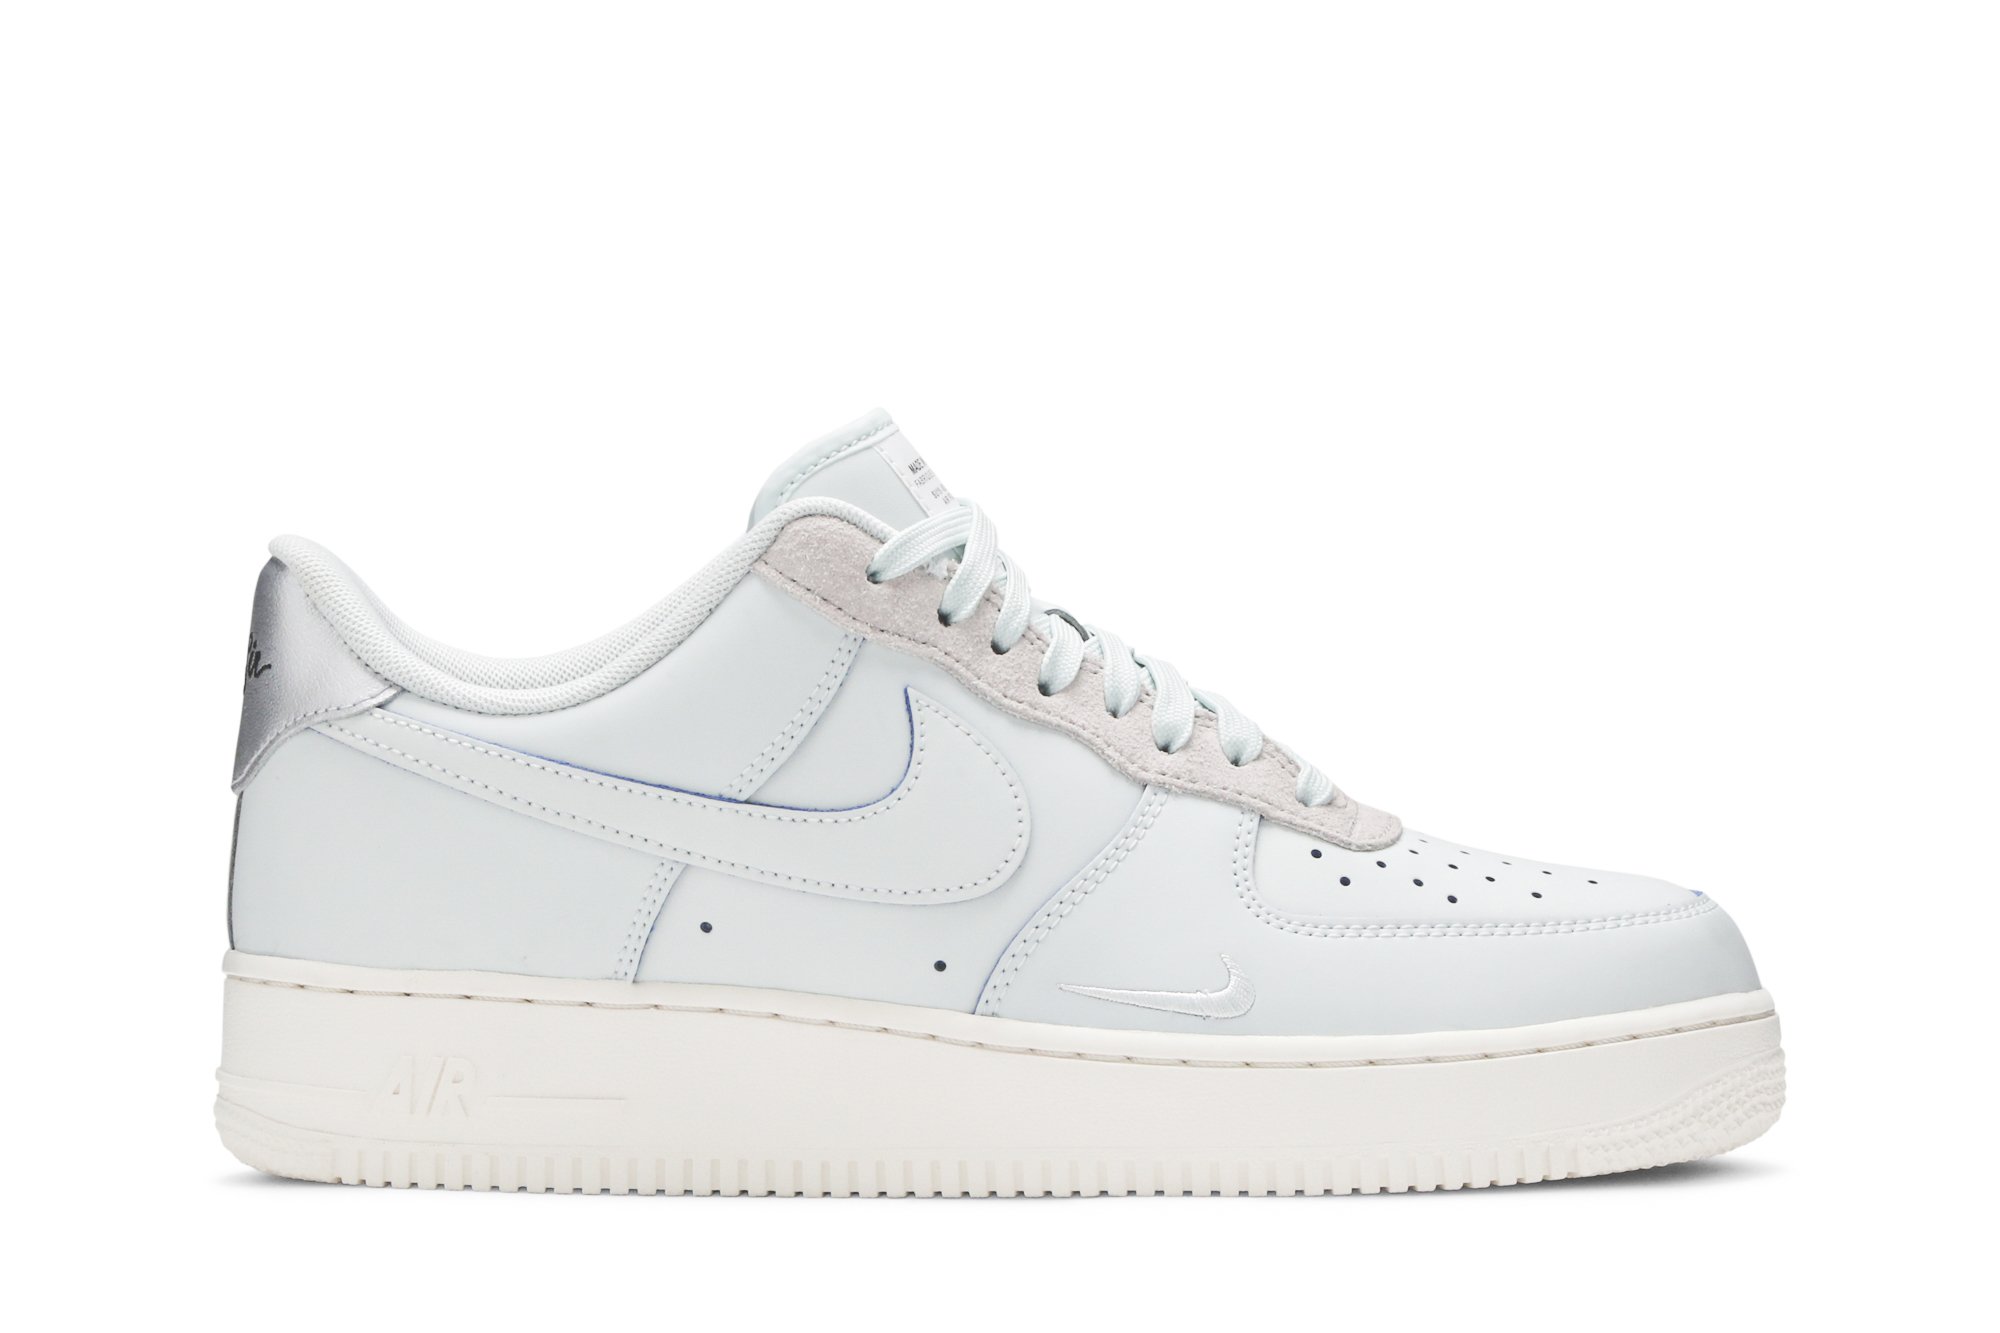 Buy Devin Booker x Air Force 1 Low LV8 'Moss Point' PE - CJ9716